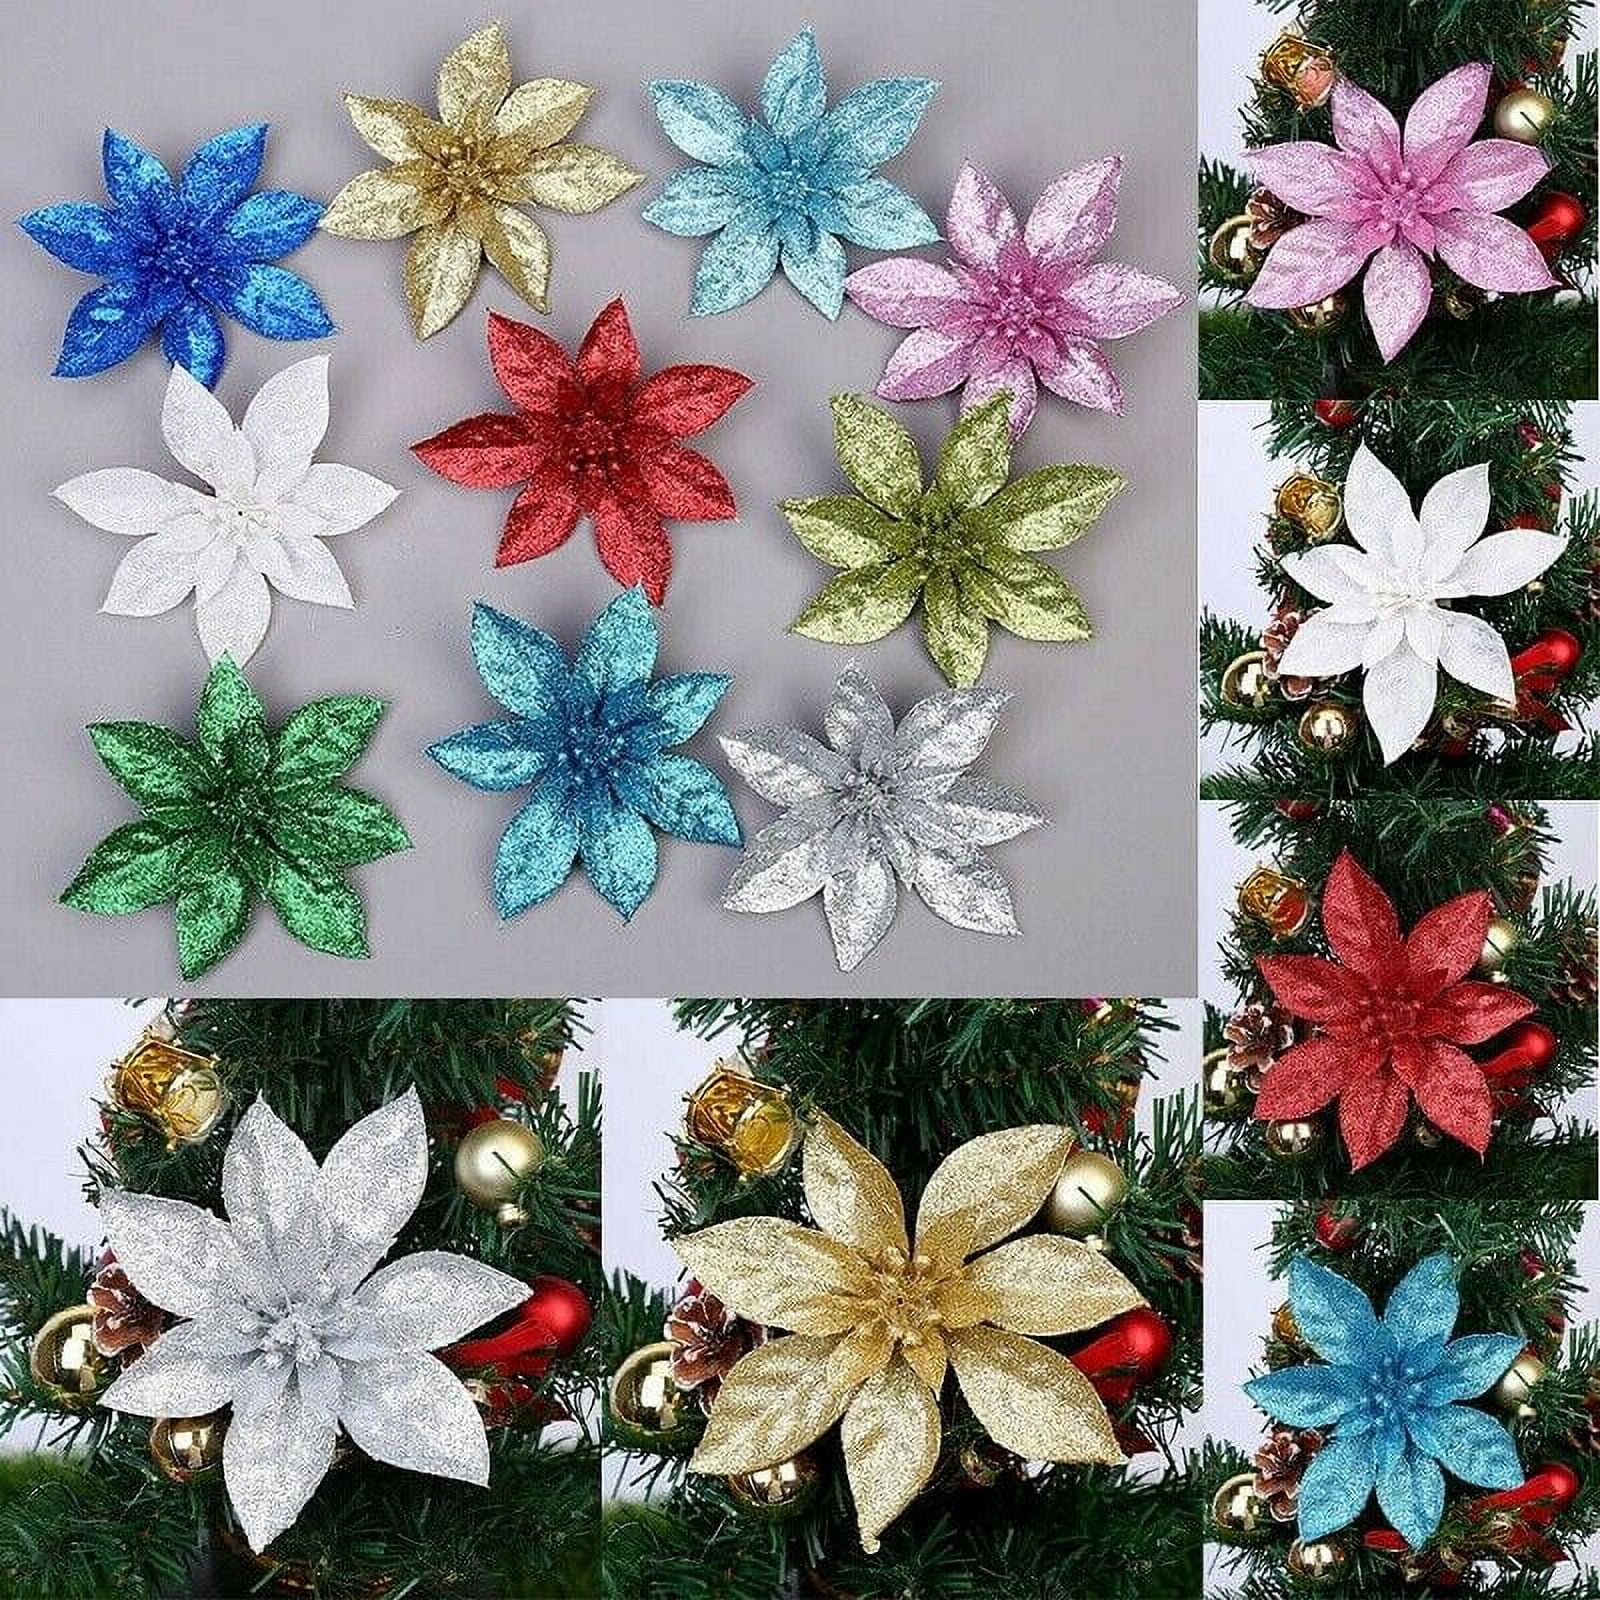  VOSAREA 10pcs Pointed Christmas Flowers Christmas Glitter  Artificial Flowers Xmas Garlands Flower Xmas Flowers Decorations Poinsettia  Tree Ornament Xmas Hanging Wreath Spray : Home & Kitchen